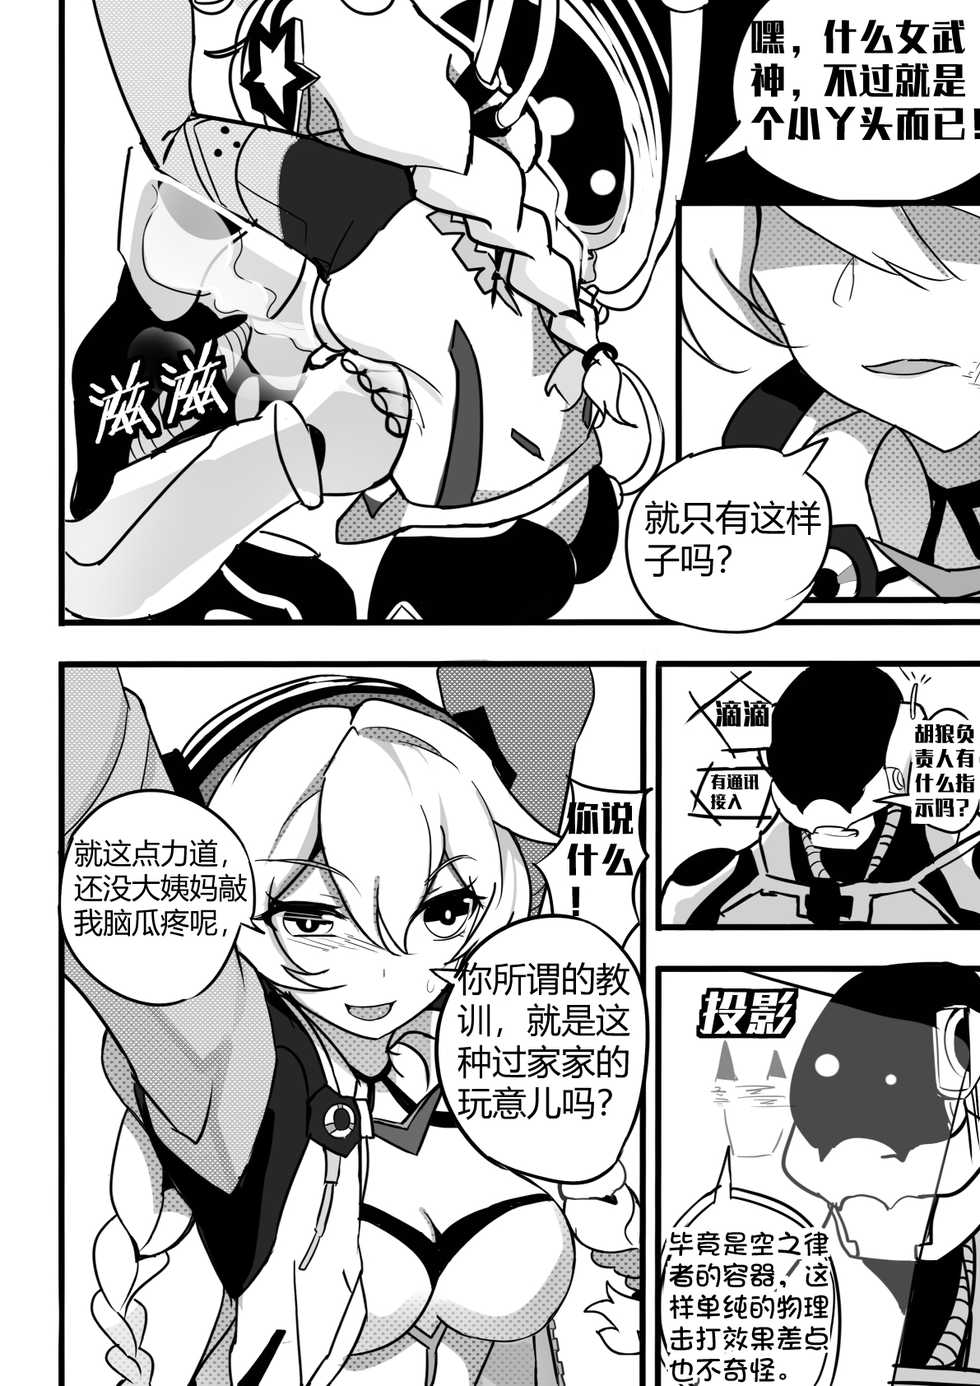 (White Bank) Collapse 1-6 (Honkai Impact 3rd) [Chinese] - Page 18